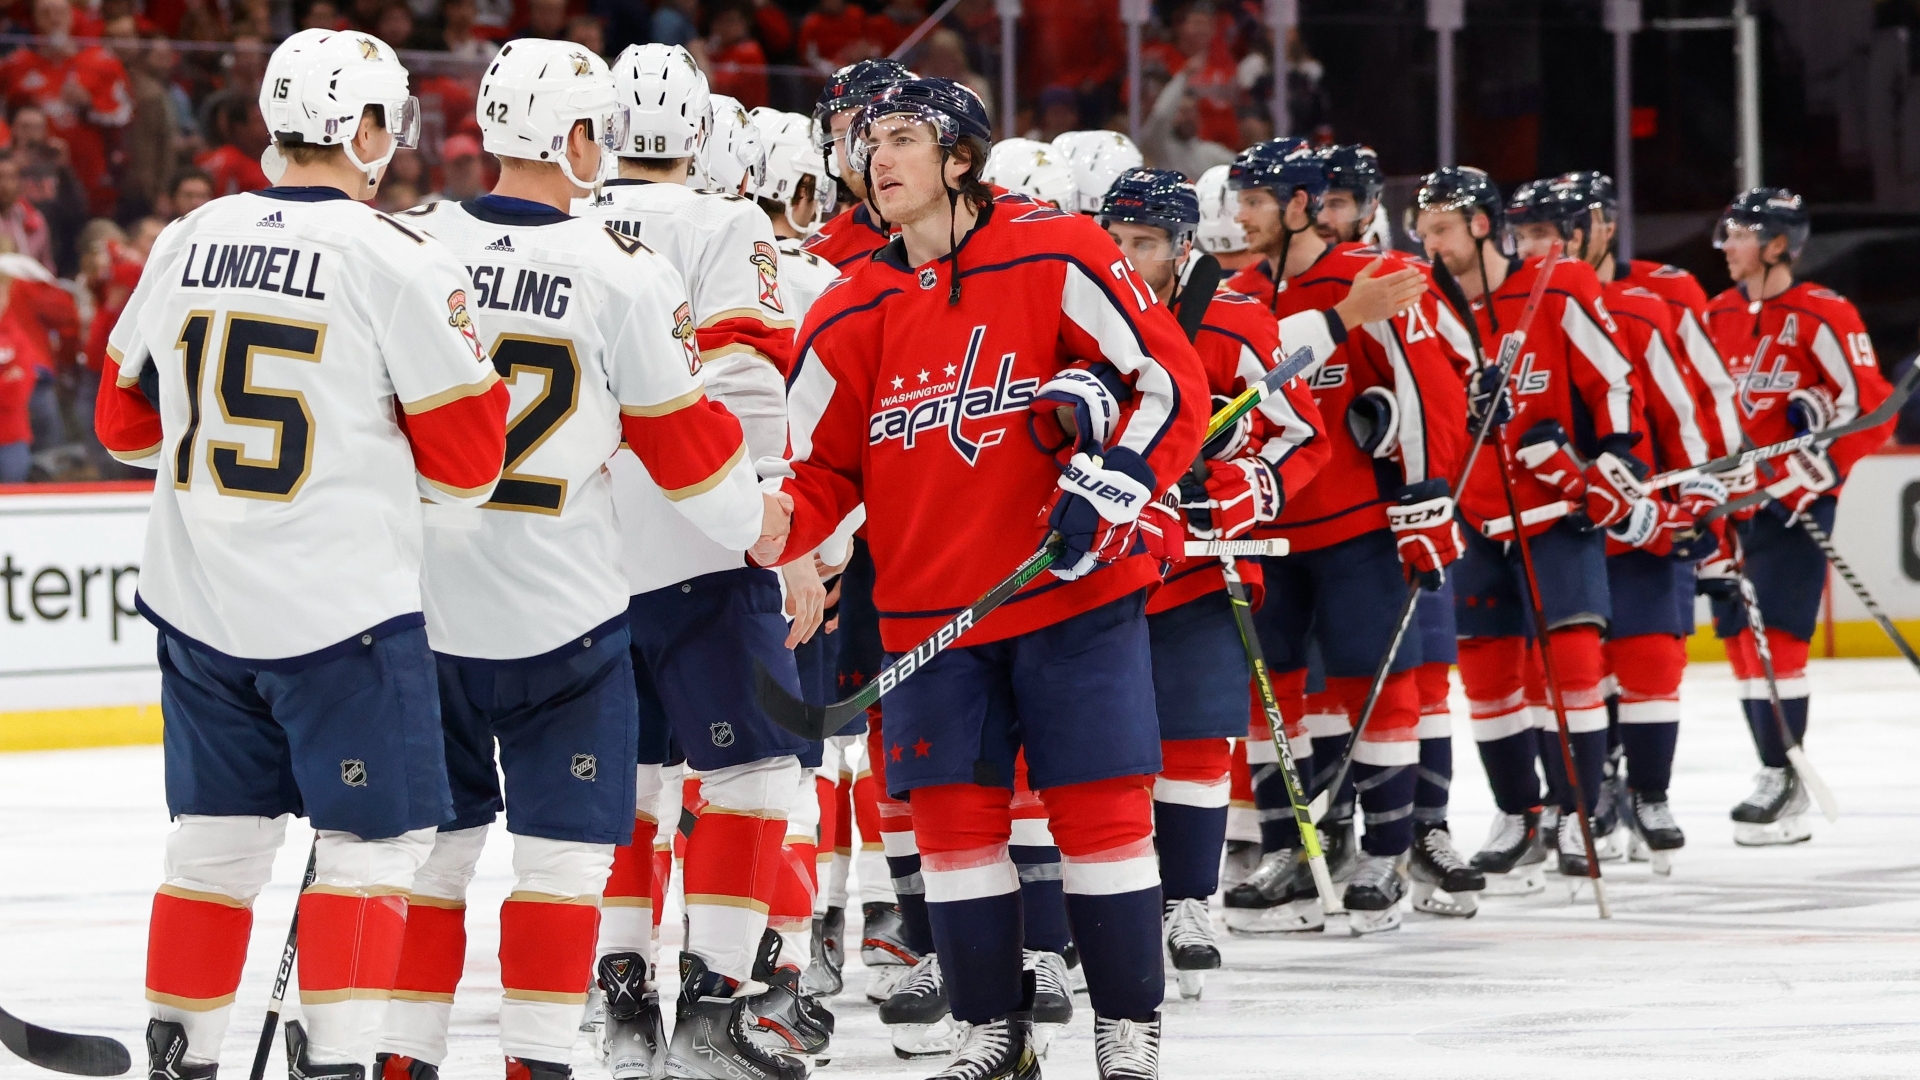 Capitals enter 2022-23 season discontent with first-round playoff exits - WTOP News